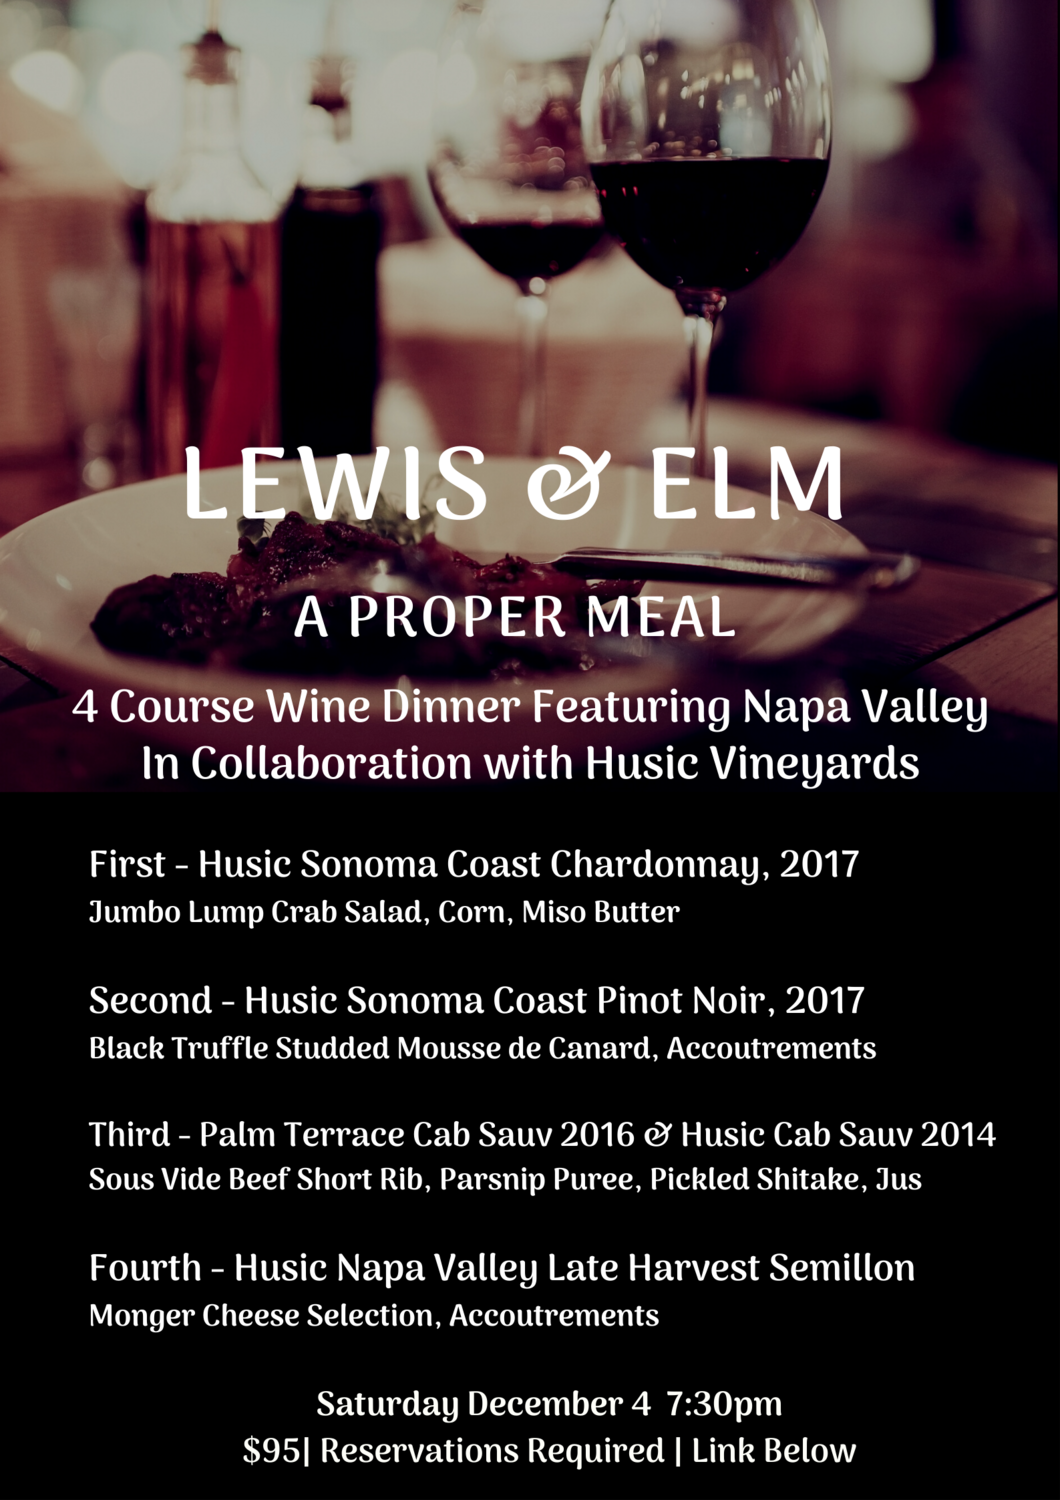 Napa Valley Wine Dinner, with Frank Husic, owner of Husic Vineyards - Saturday December 4th - 7:30pm